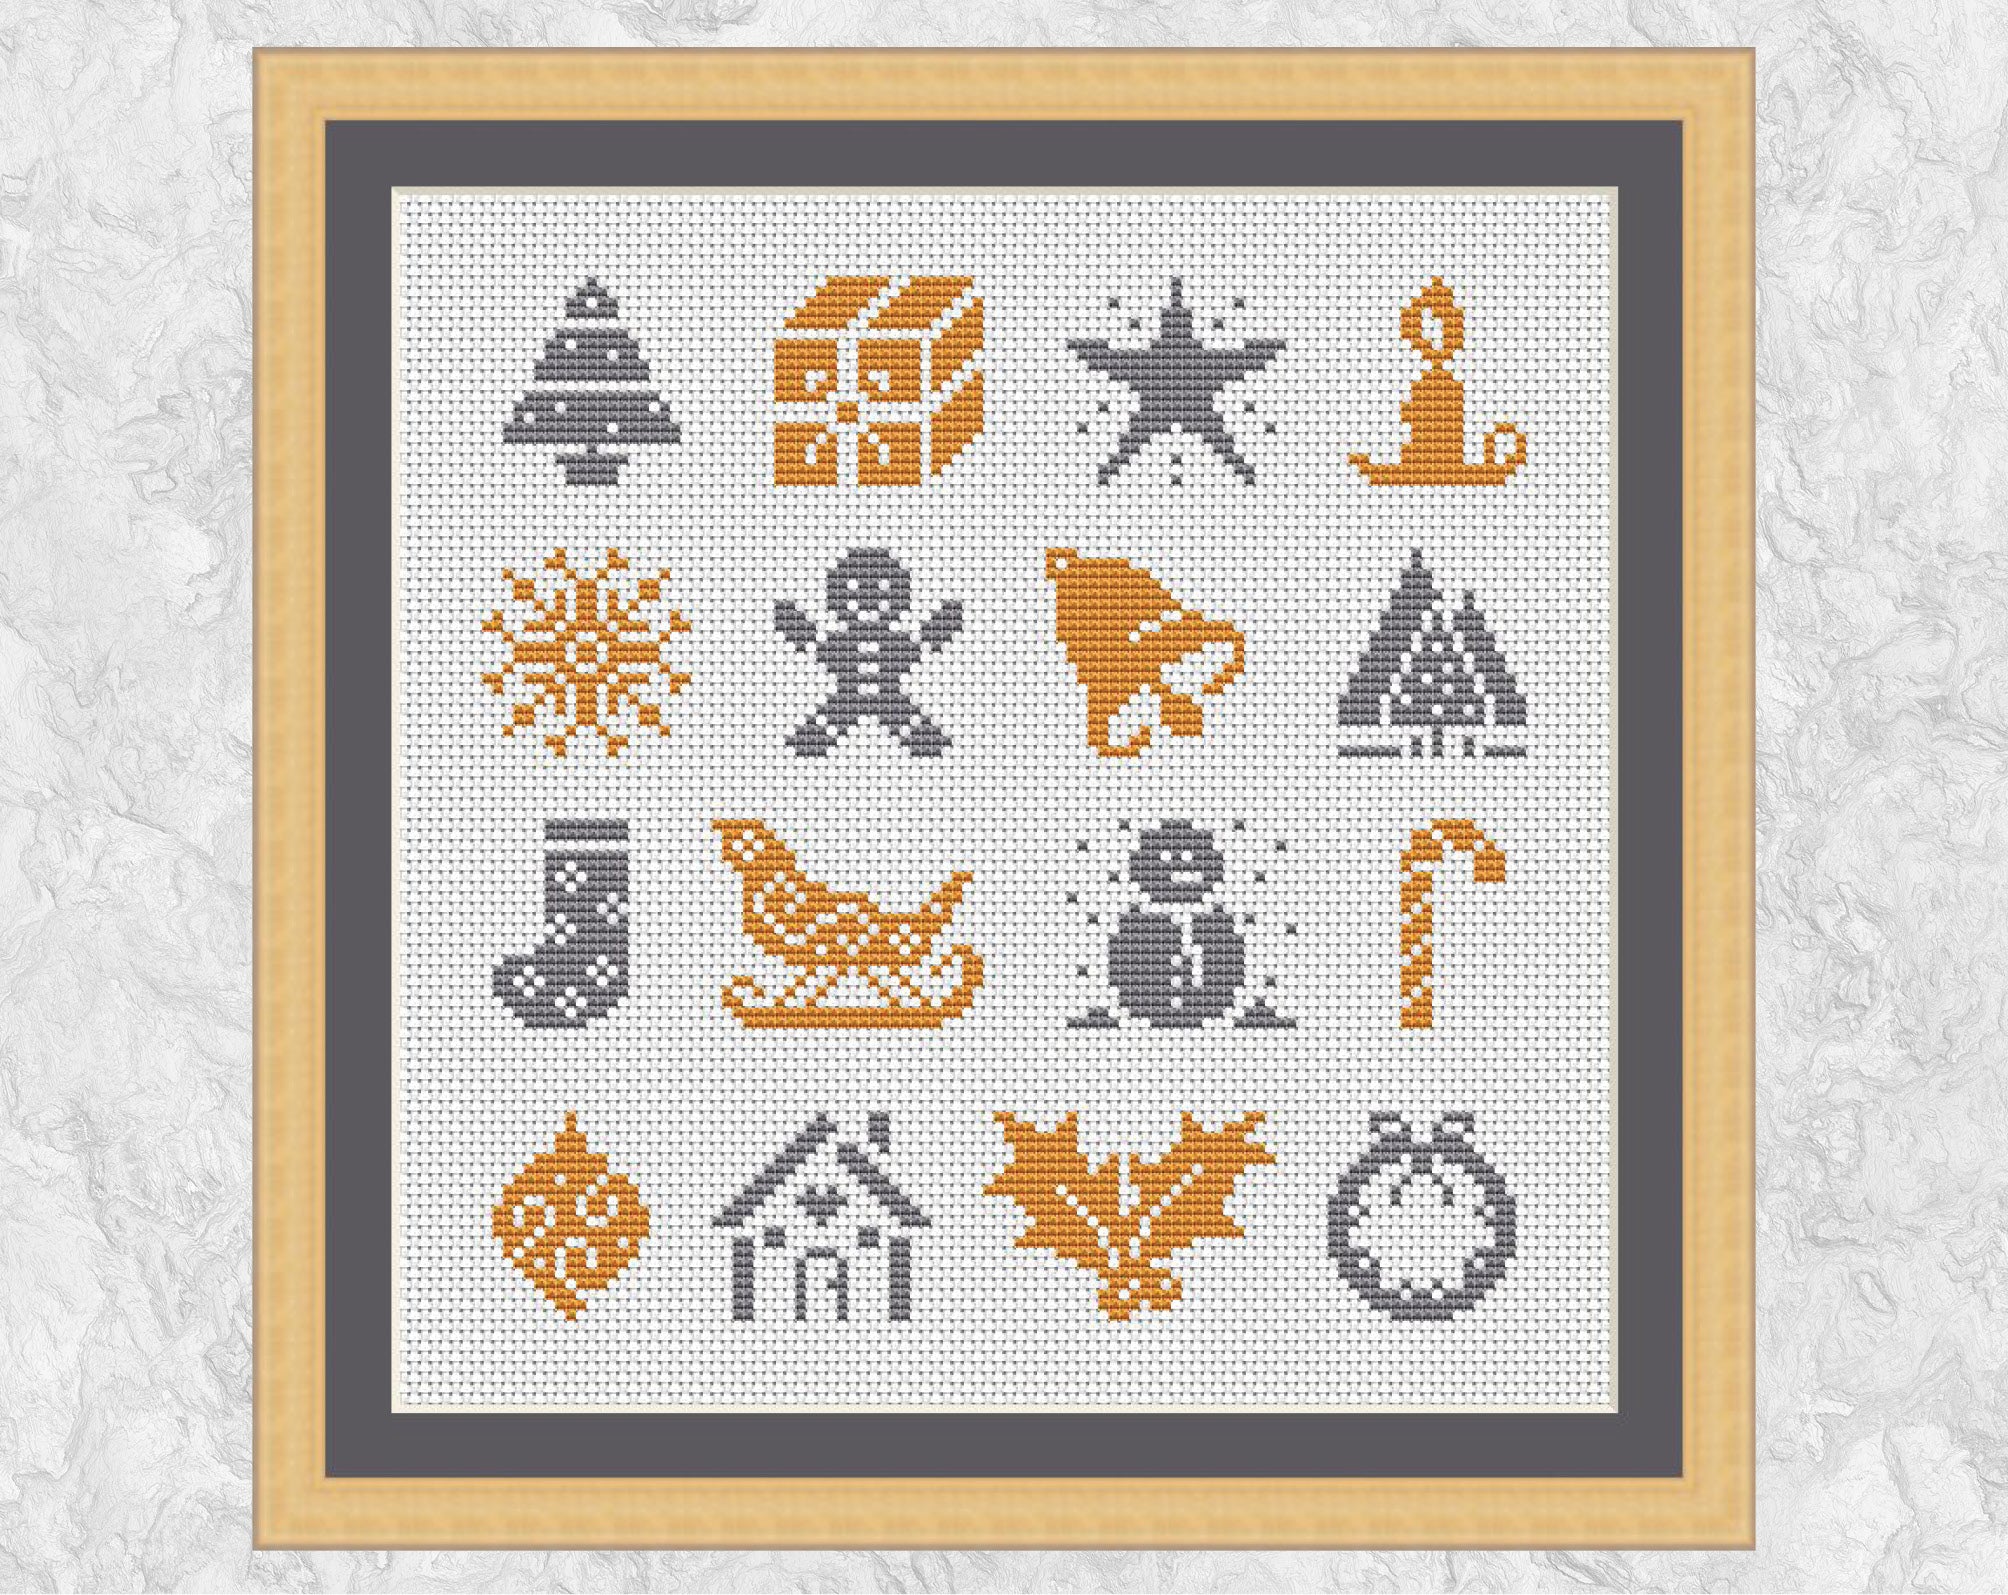 Cross stitch pattern of mini Christmas motifs suitable for Christmas cards or gift tags. The motifs shown are: Single Christmas tree; gift; star; candle; snowflake; gingebread man; bell; several Christmas trees; stocking; sleigh; snowman; candy cane; bauble; gingerbread house; holly; wreath. Shown with frame.